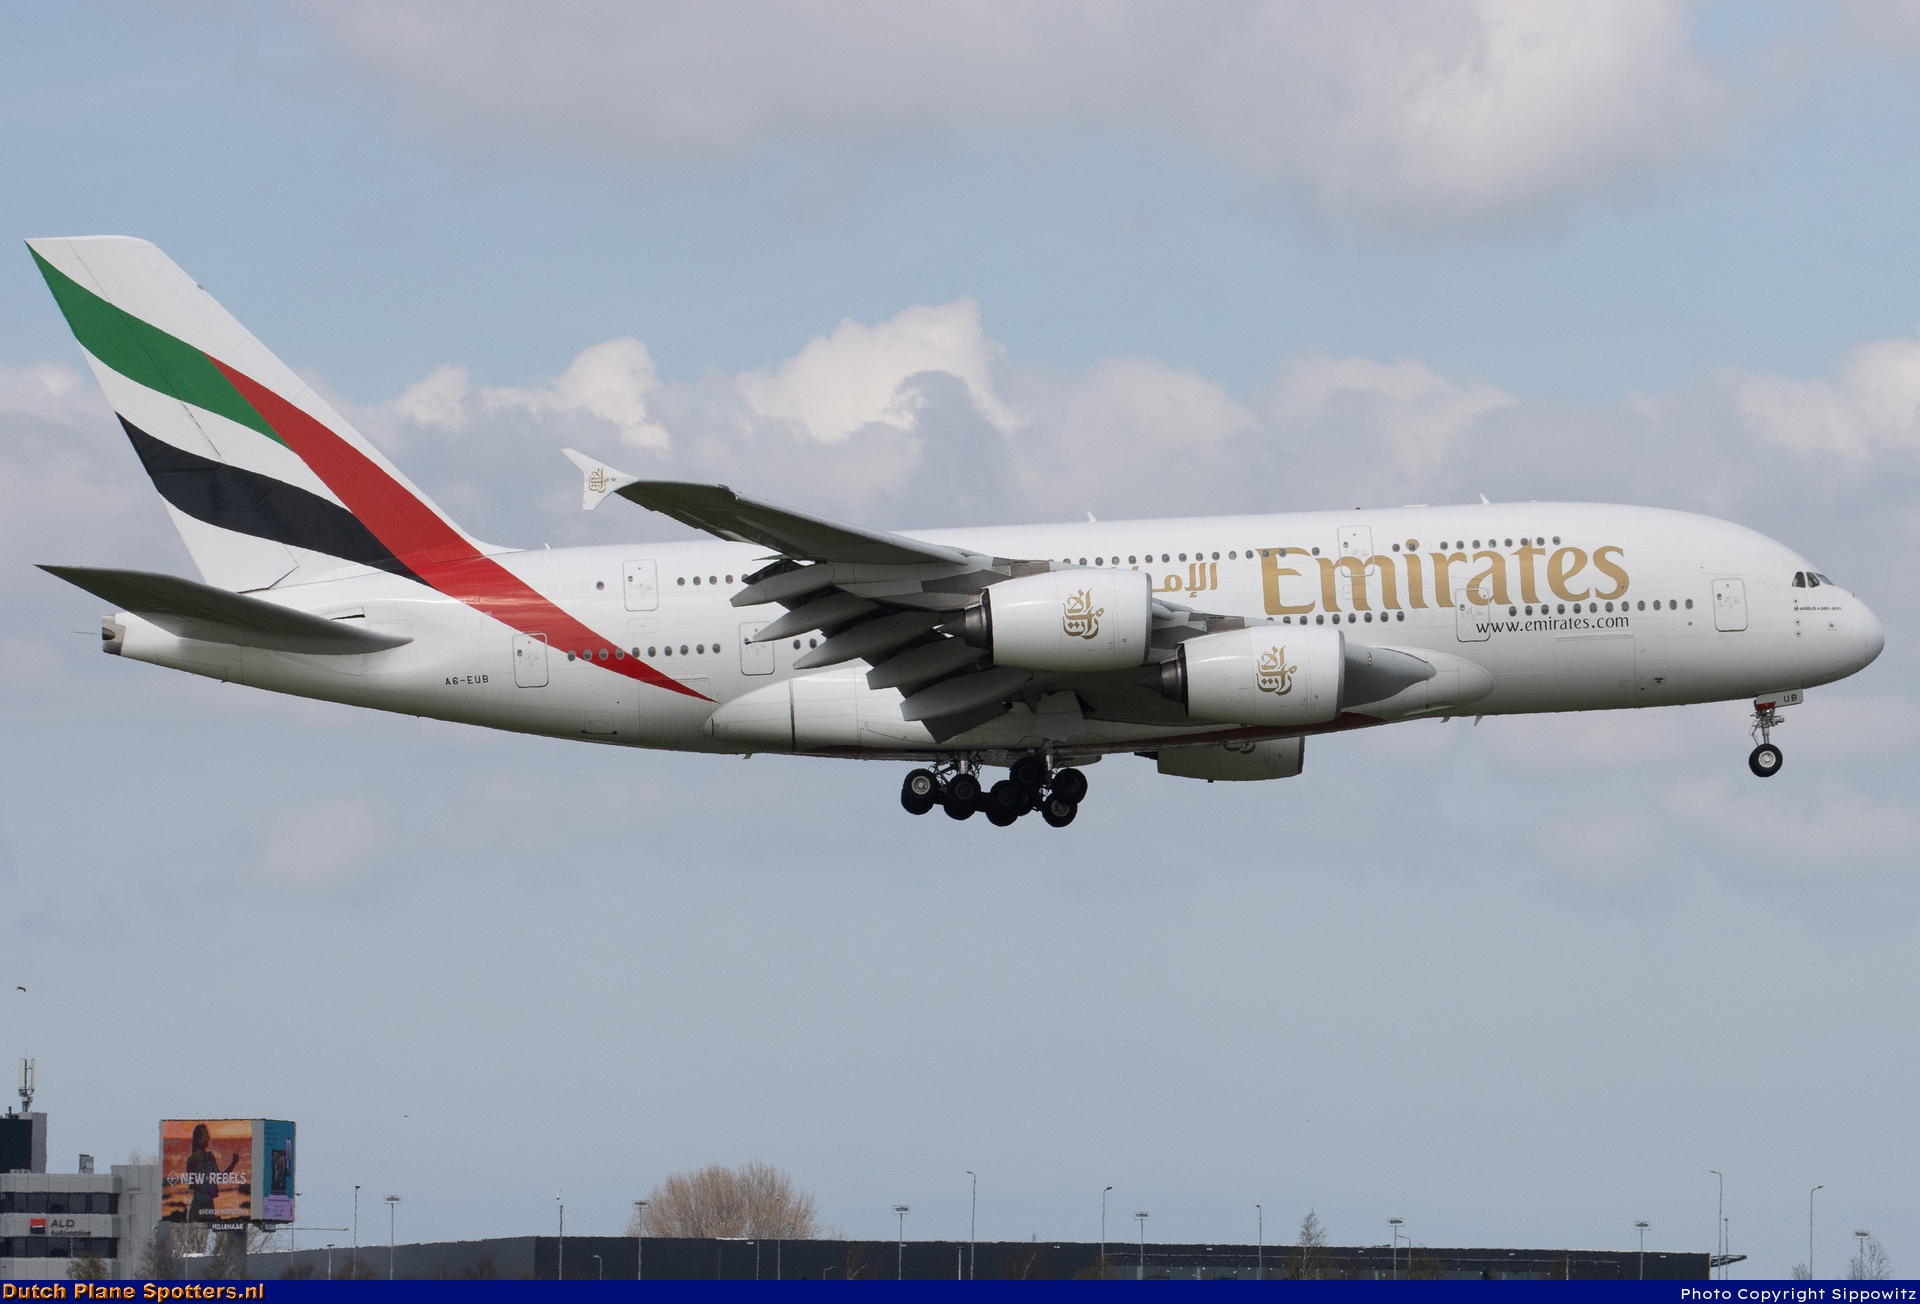 A6-EUB Airbus A380-800 Emirates by Sippowitz